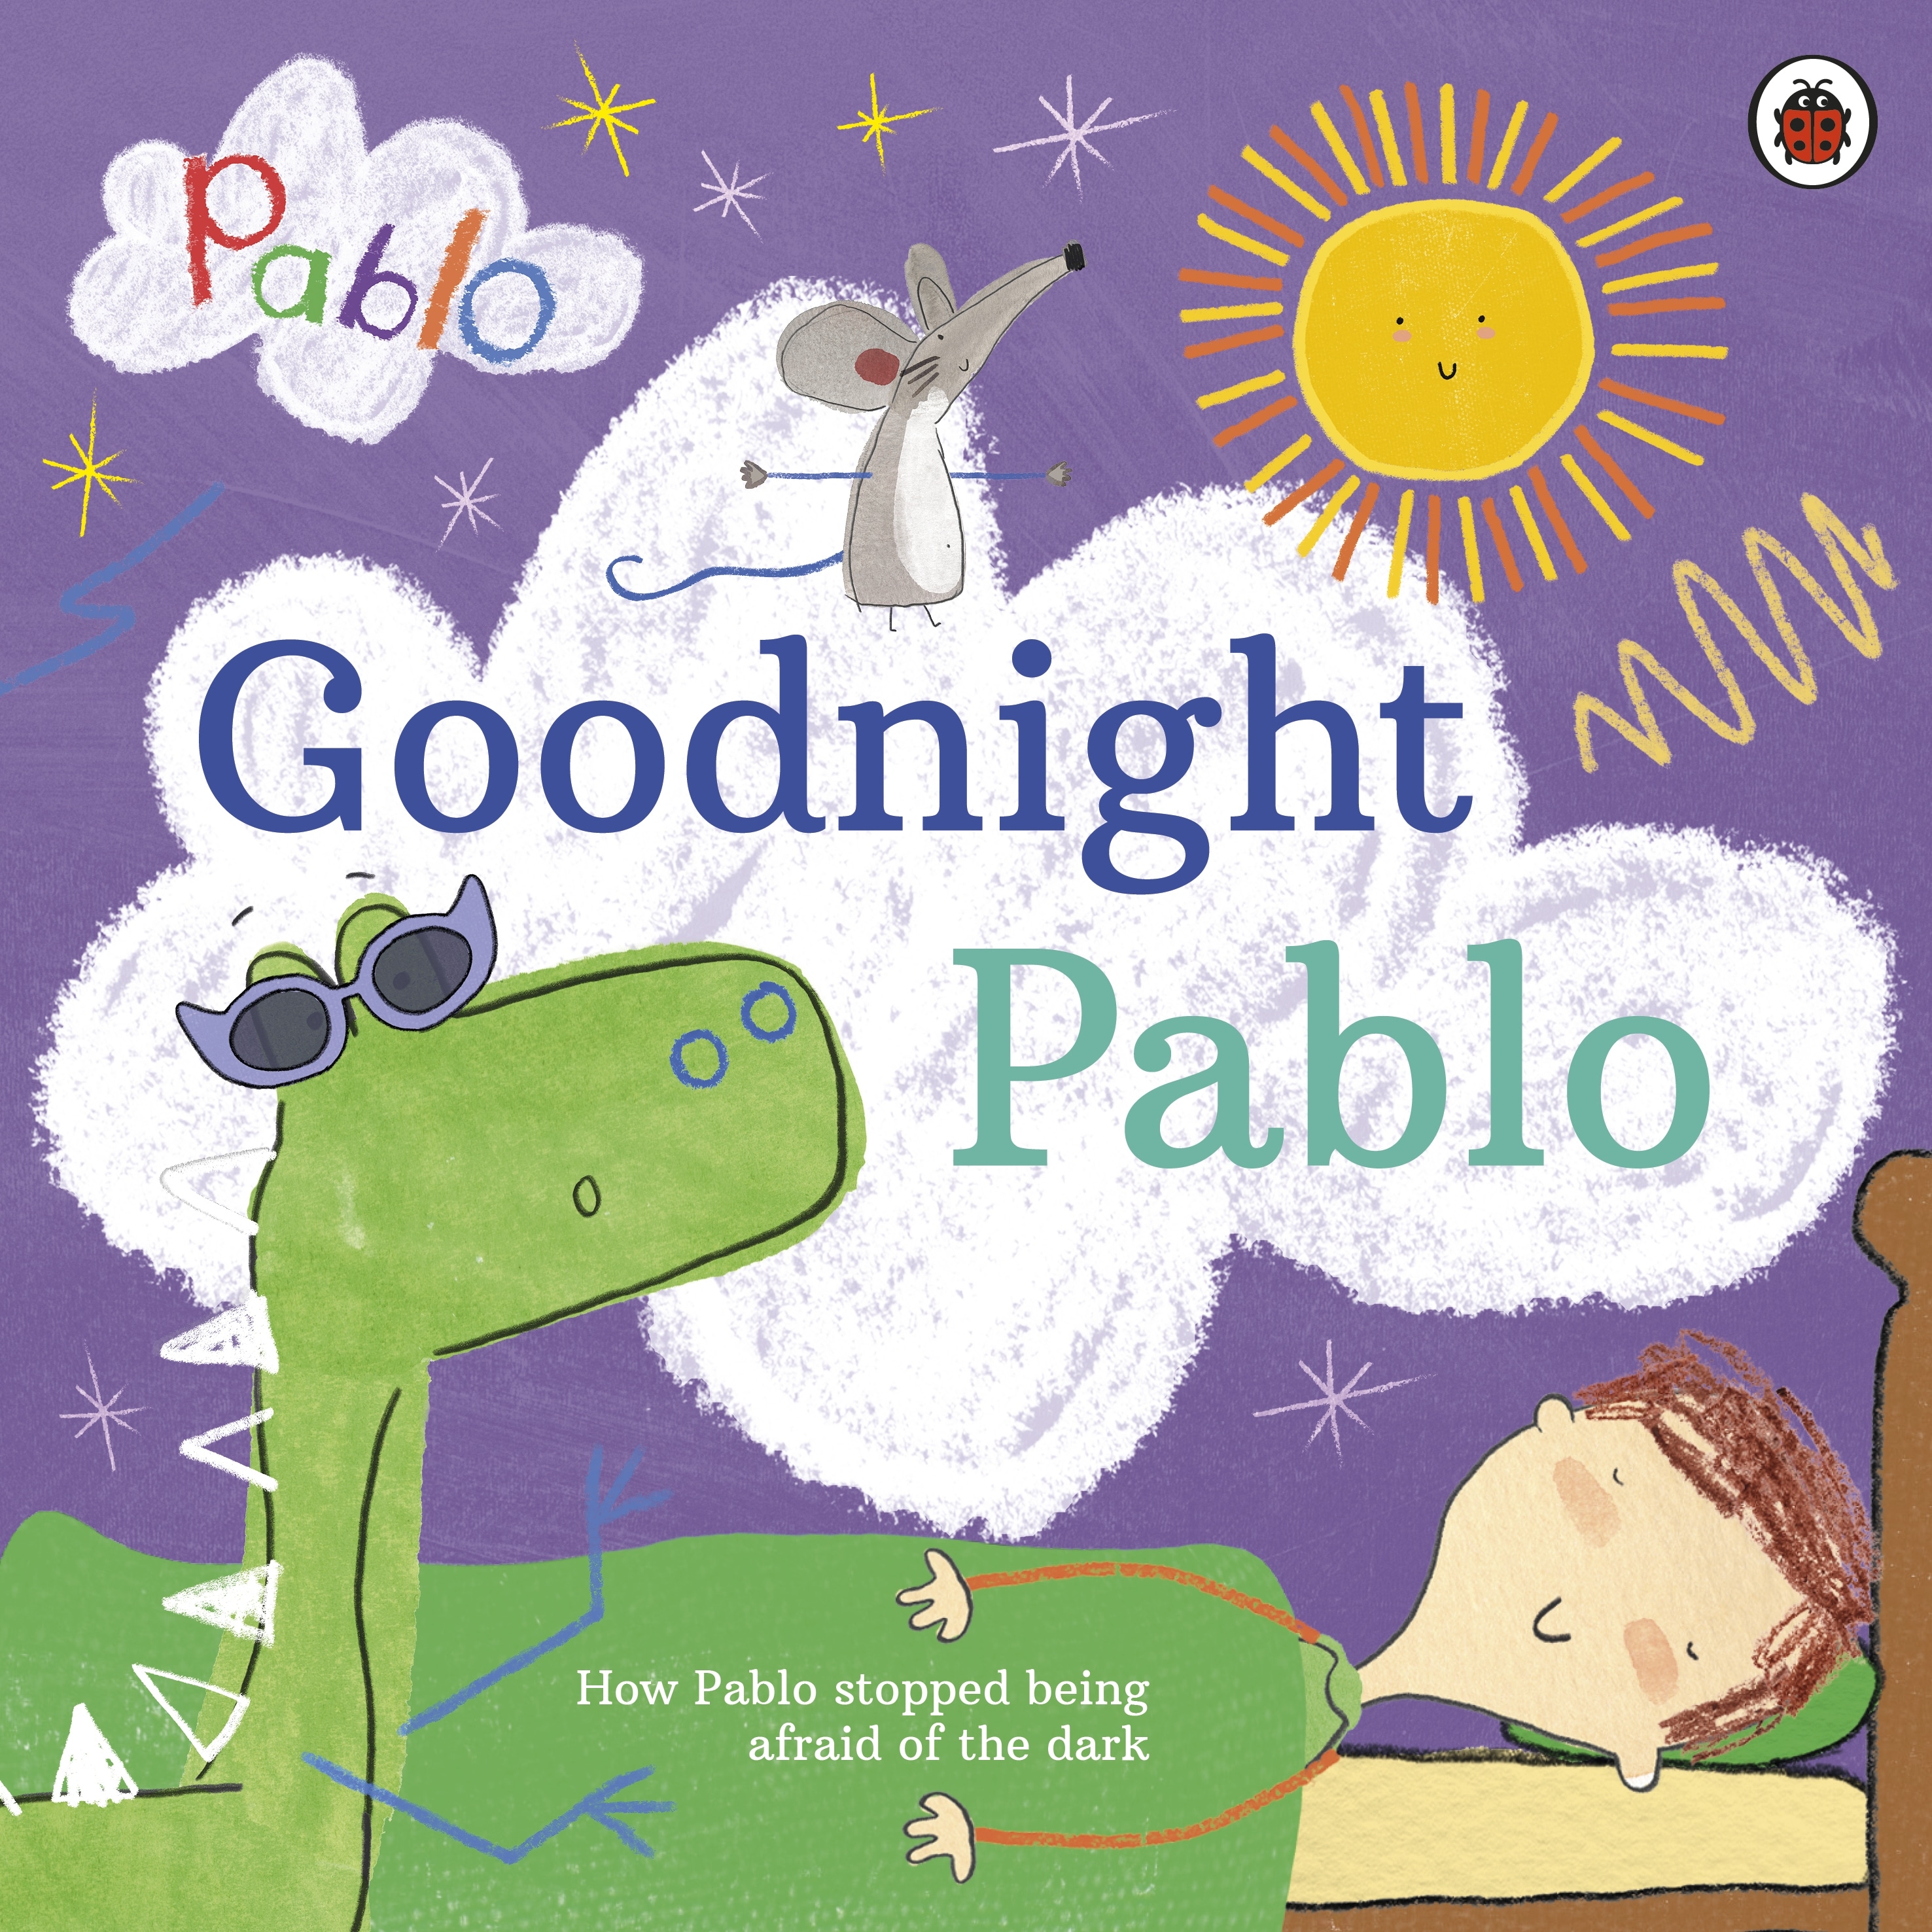 Book “Pablo: Goodnight Pablo” by Pablo — March 19, 2020